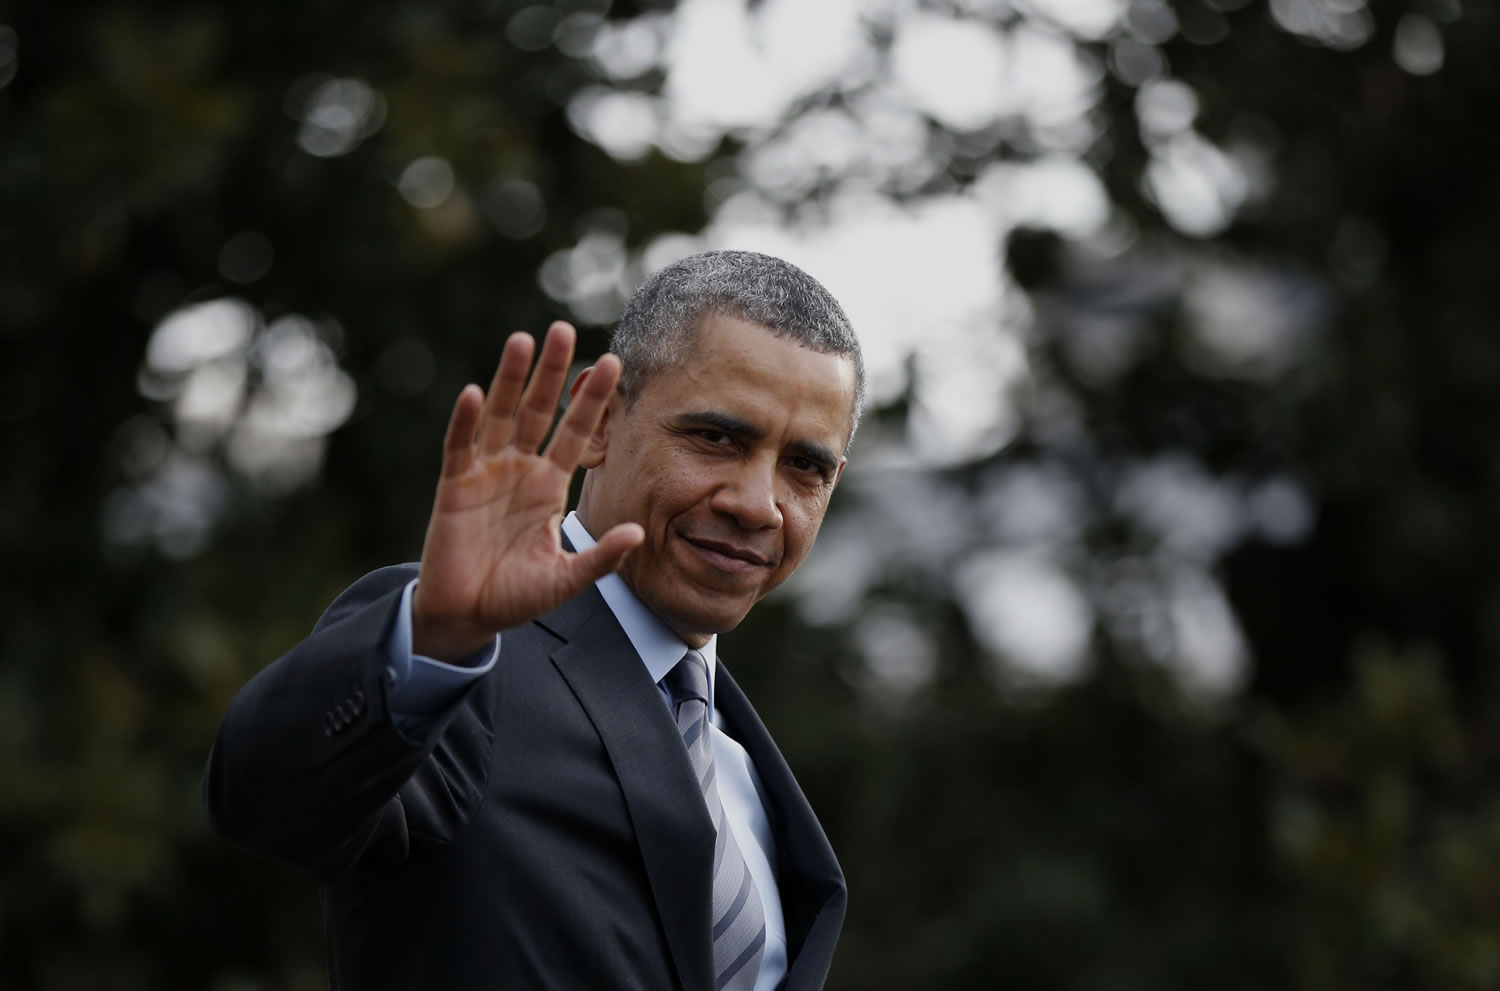 President Barack Obama waves to reporters as he walks on the South Lawn of the White House in Washington on Wednesday before boarding the Marine One helicopter to Andrews Air Force Base, Md., for his trip to Mexico.